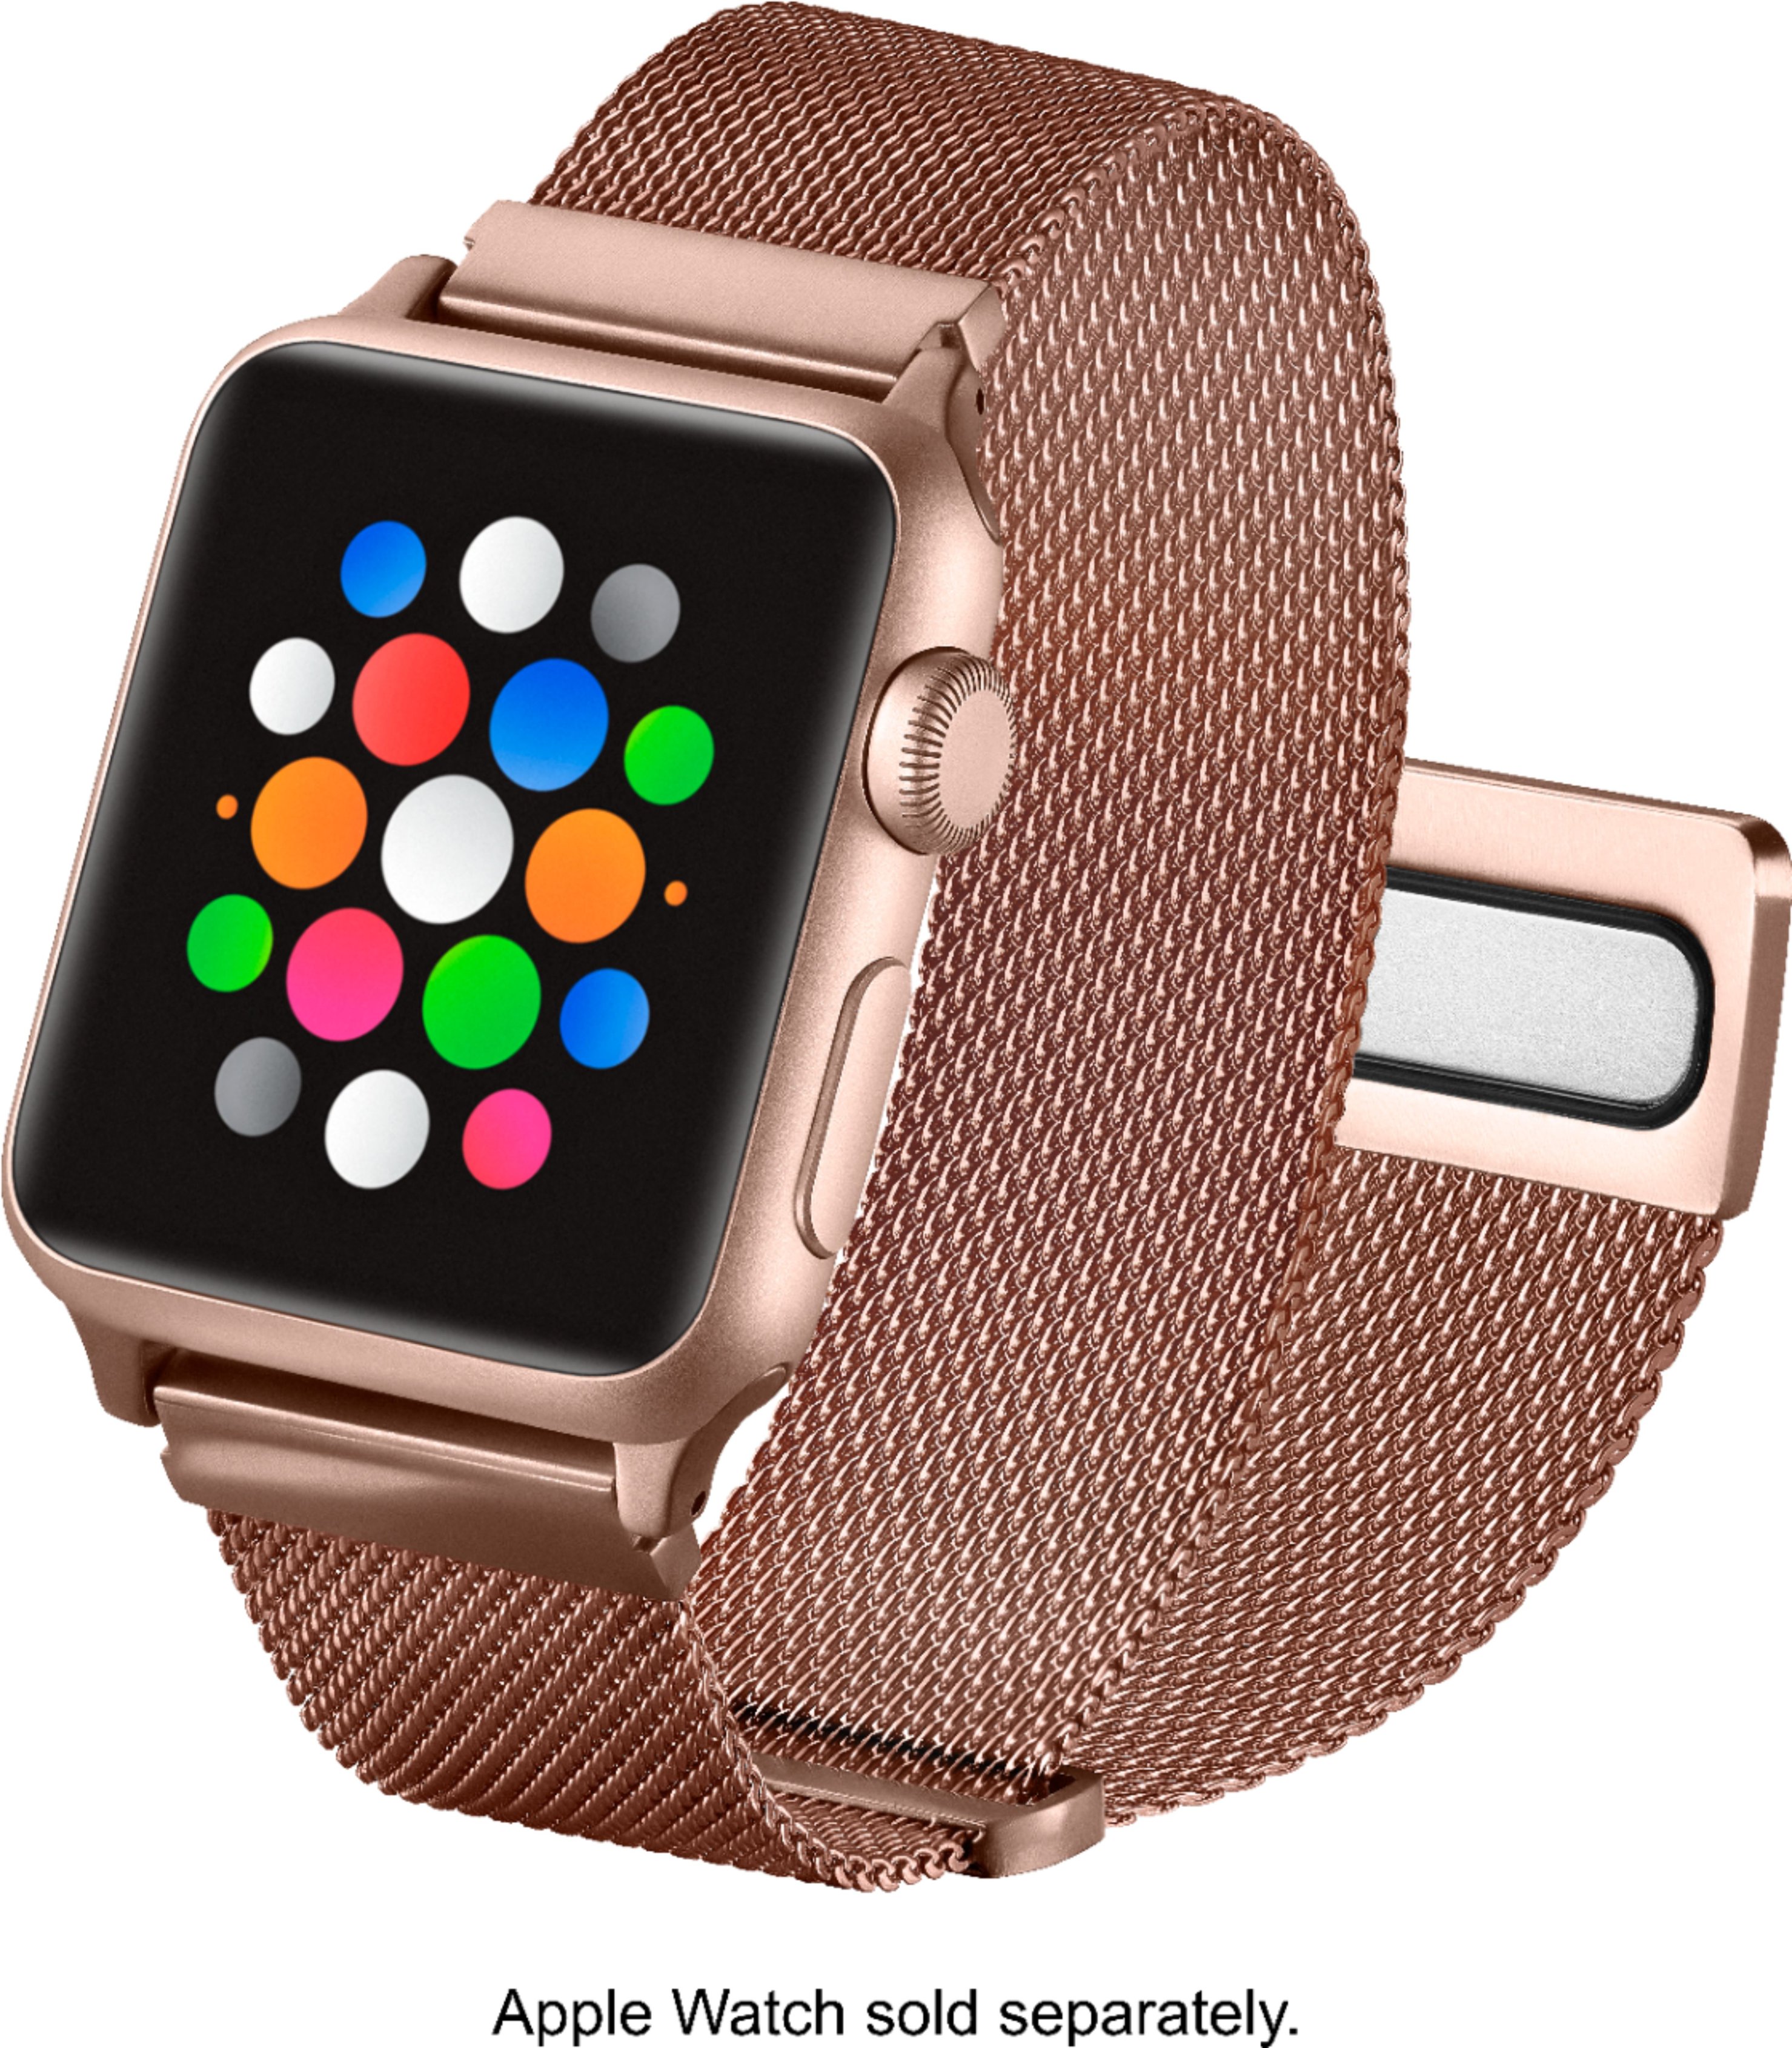 Apple Watch Band  Rose Gold Stainless Steel Metal – Fullmosa